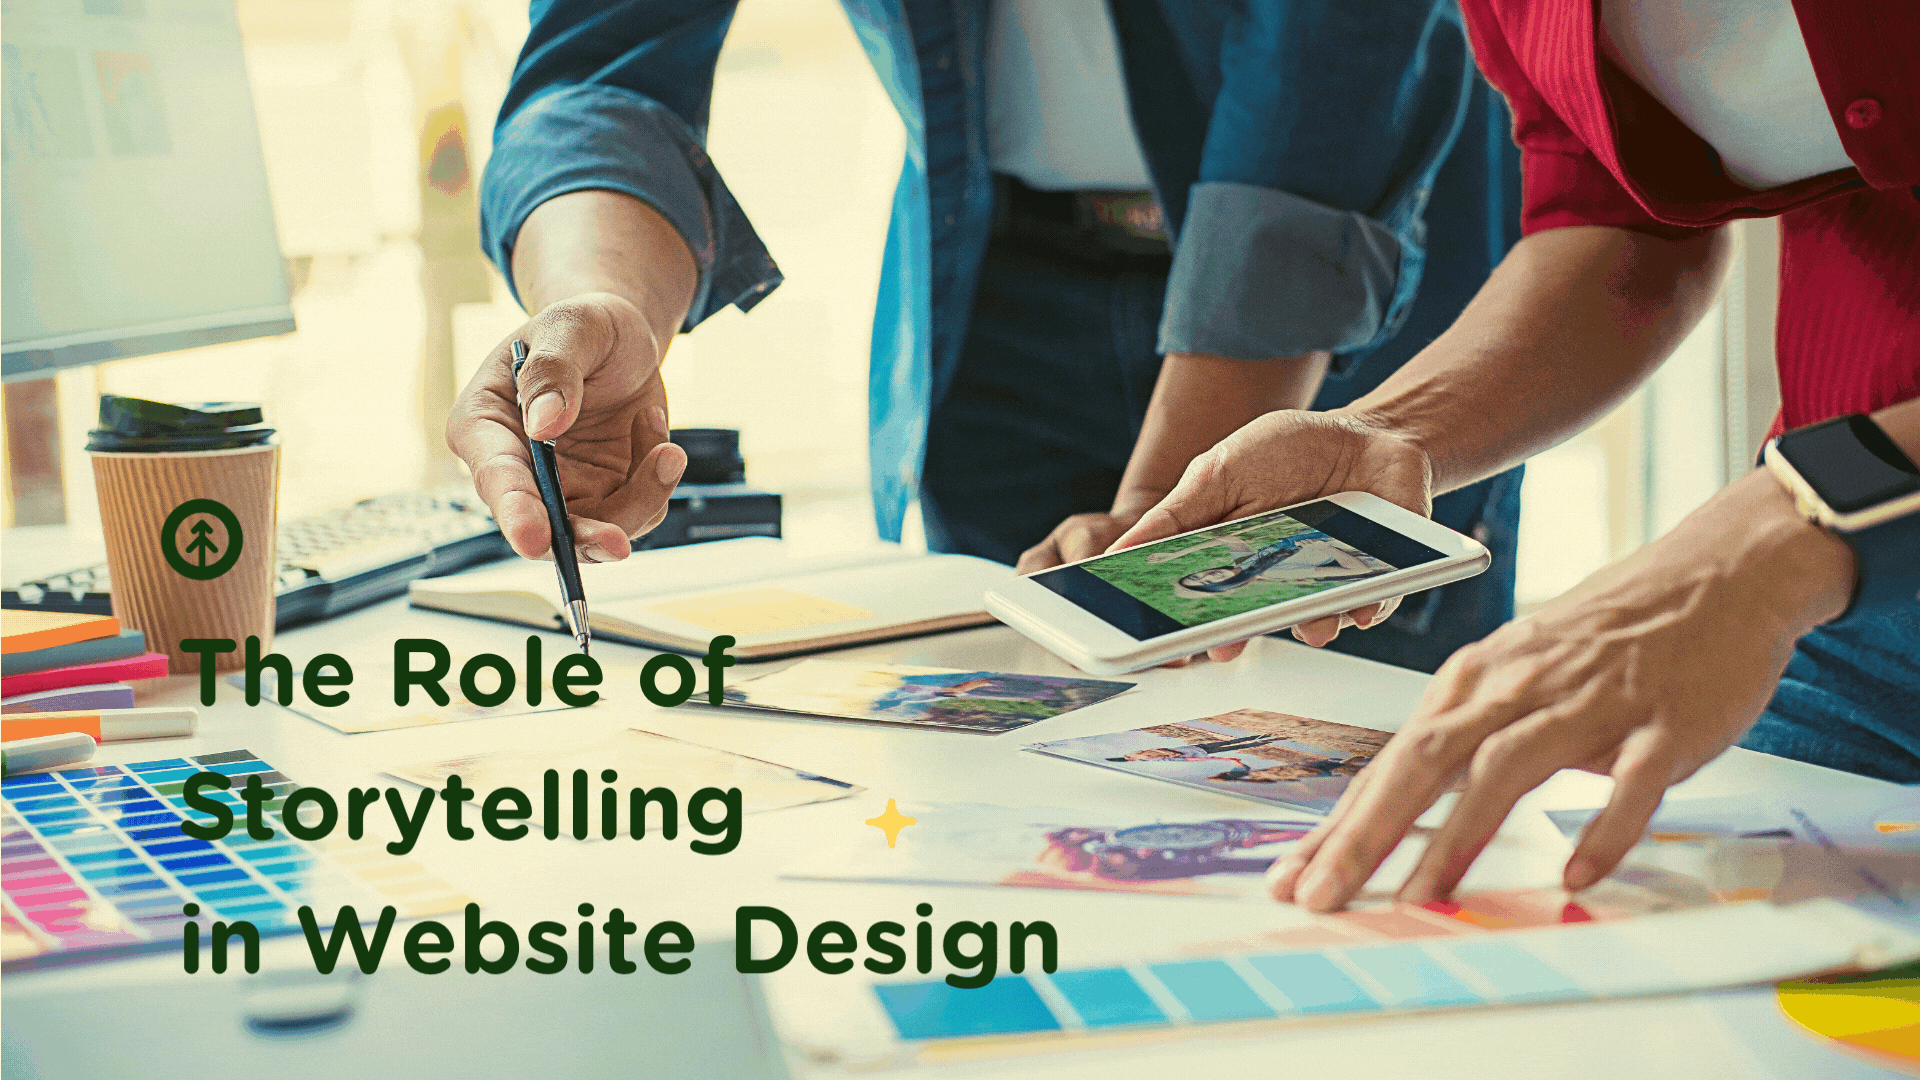 The Role of Storytelling in Website Design